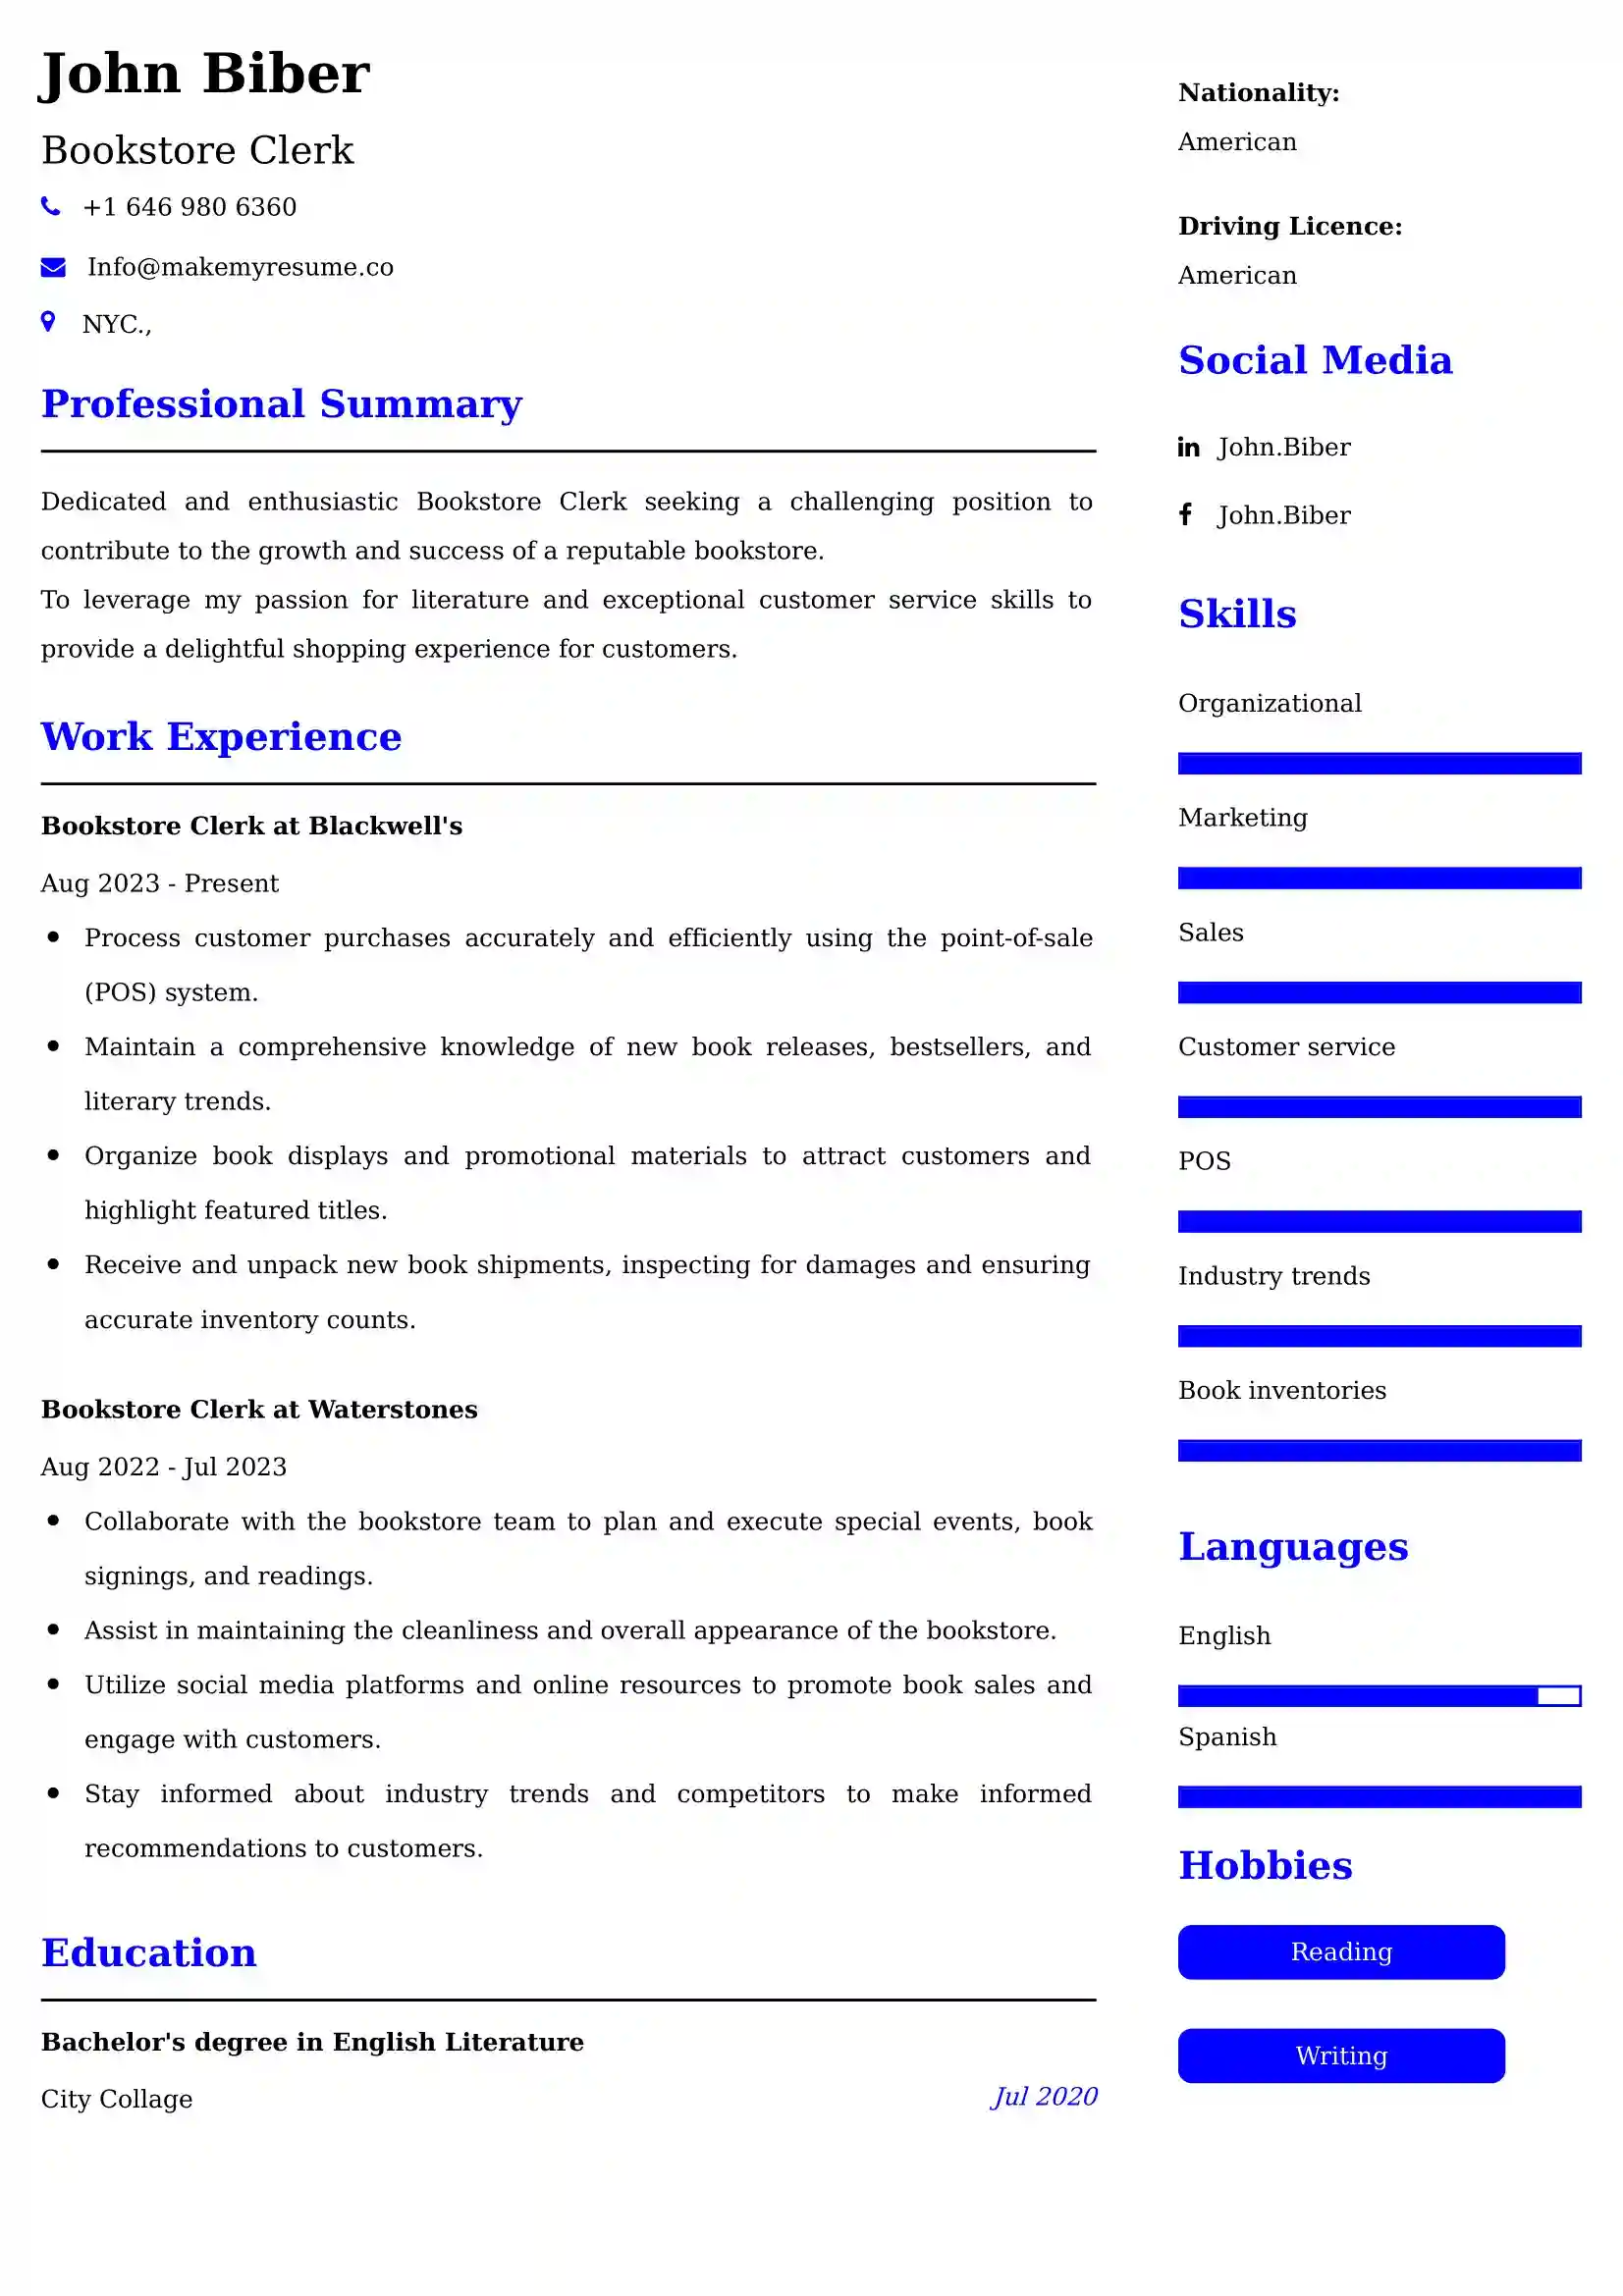 Bookstore Clerk Resume Examples - UAE Format and Tips.